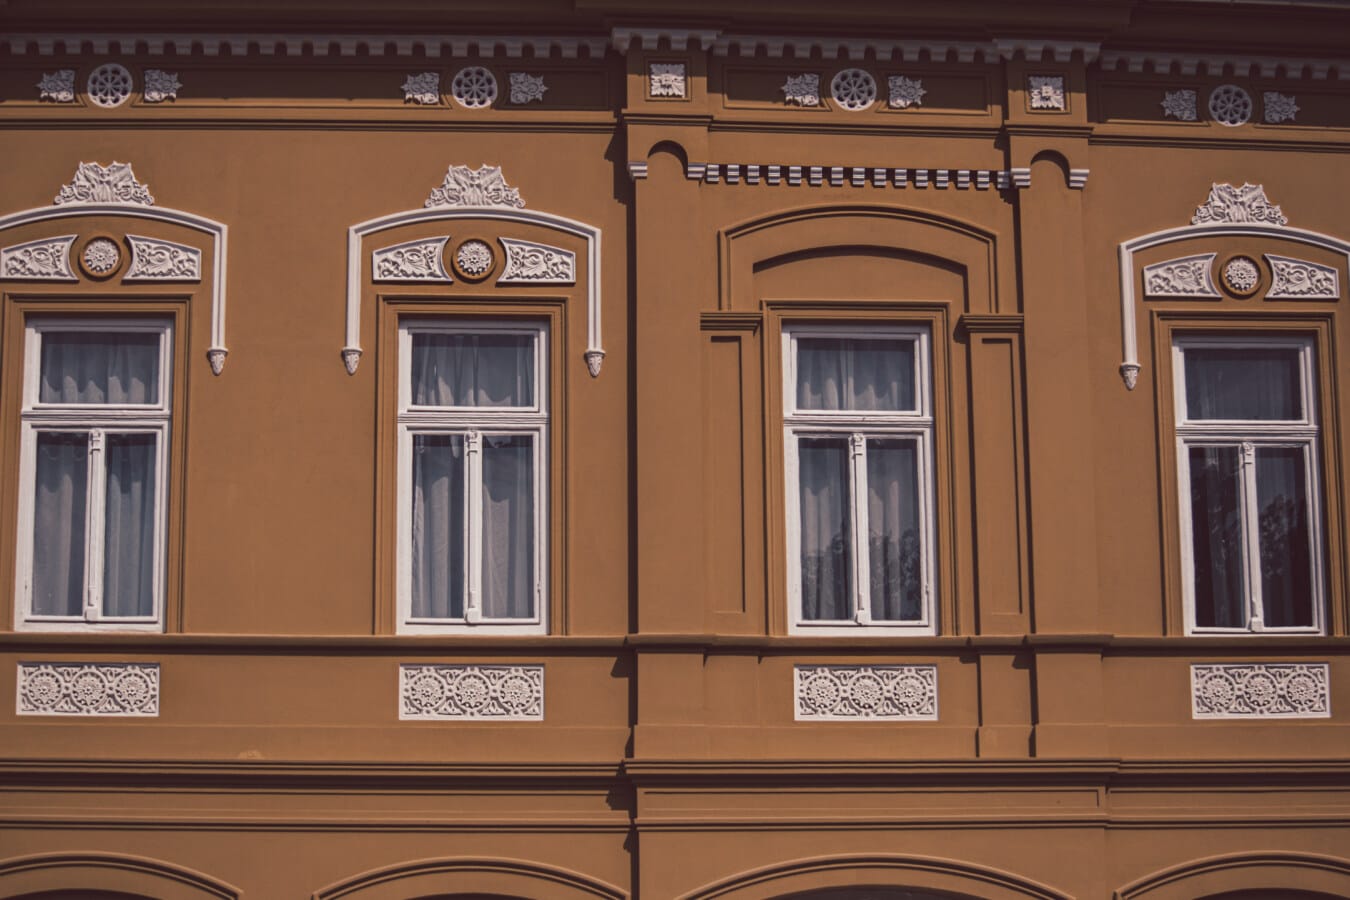 house, wall, light brown, architectural style, baroque, residential, handmade, historic, window, architecture